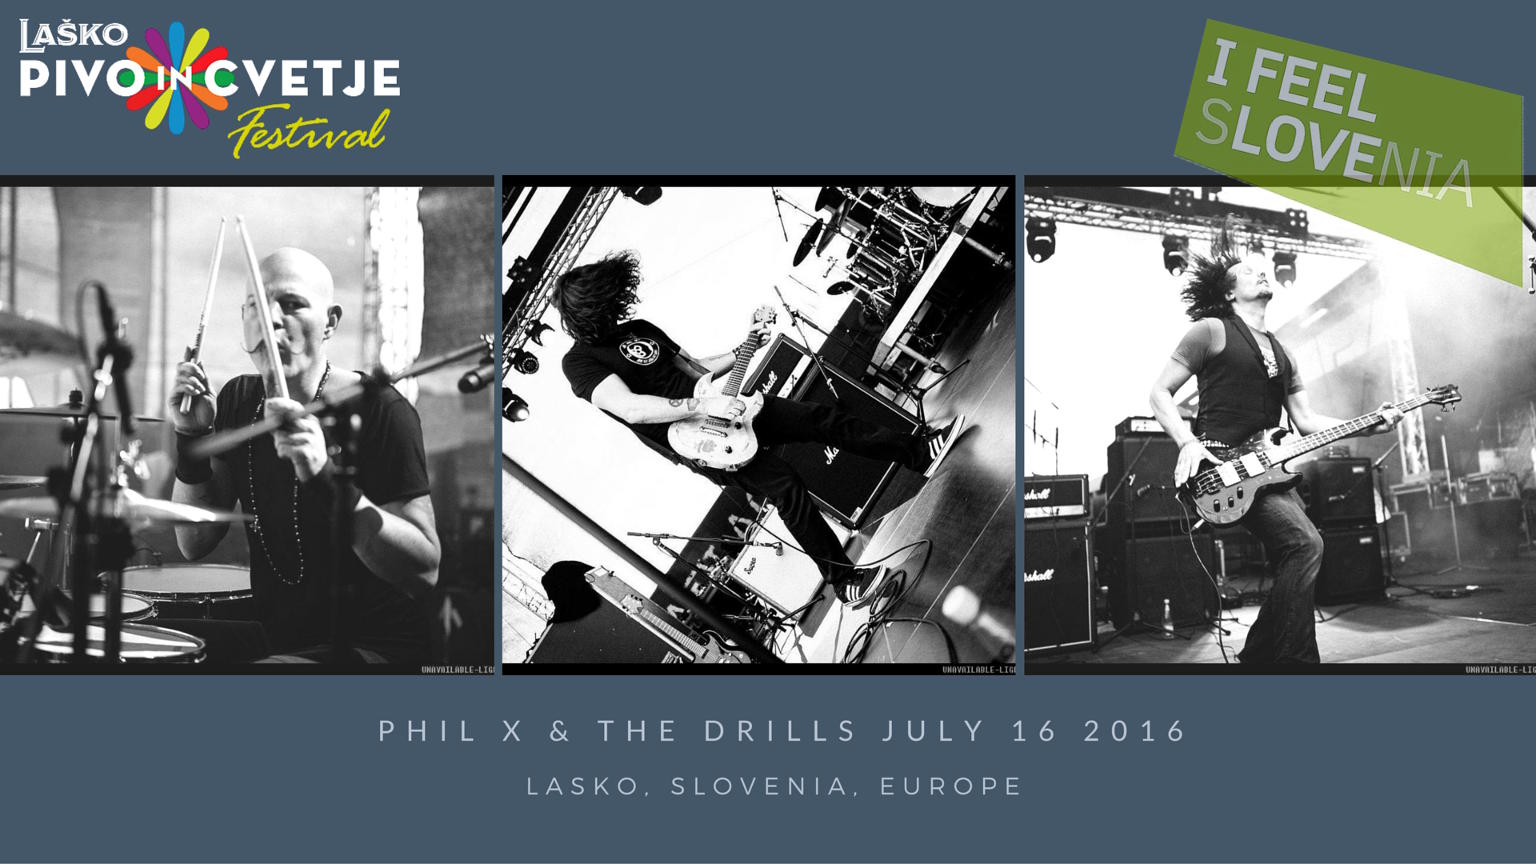 Phil X & The Drills to headline Slovenian Festival July 16th 2016